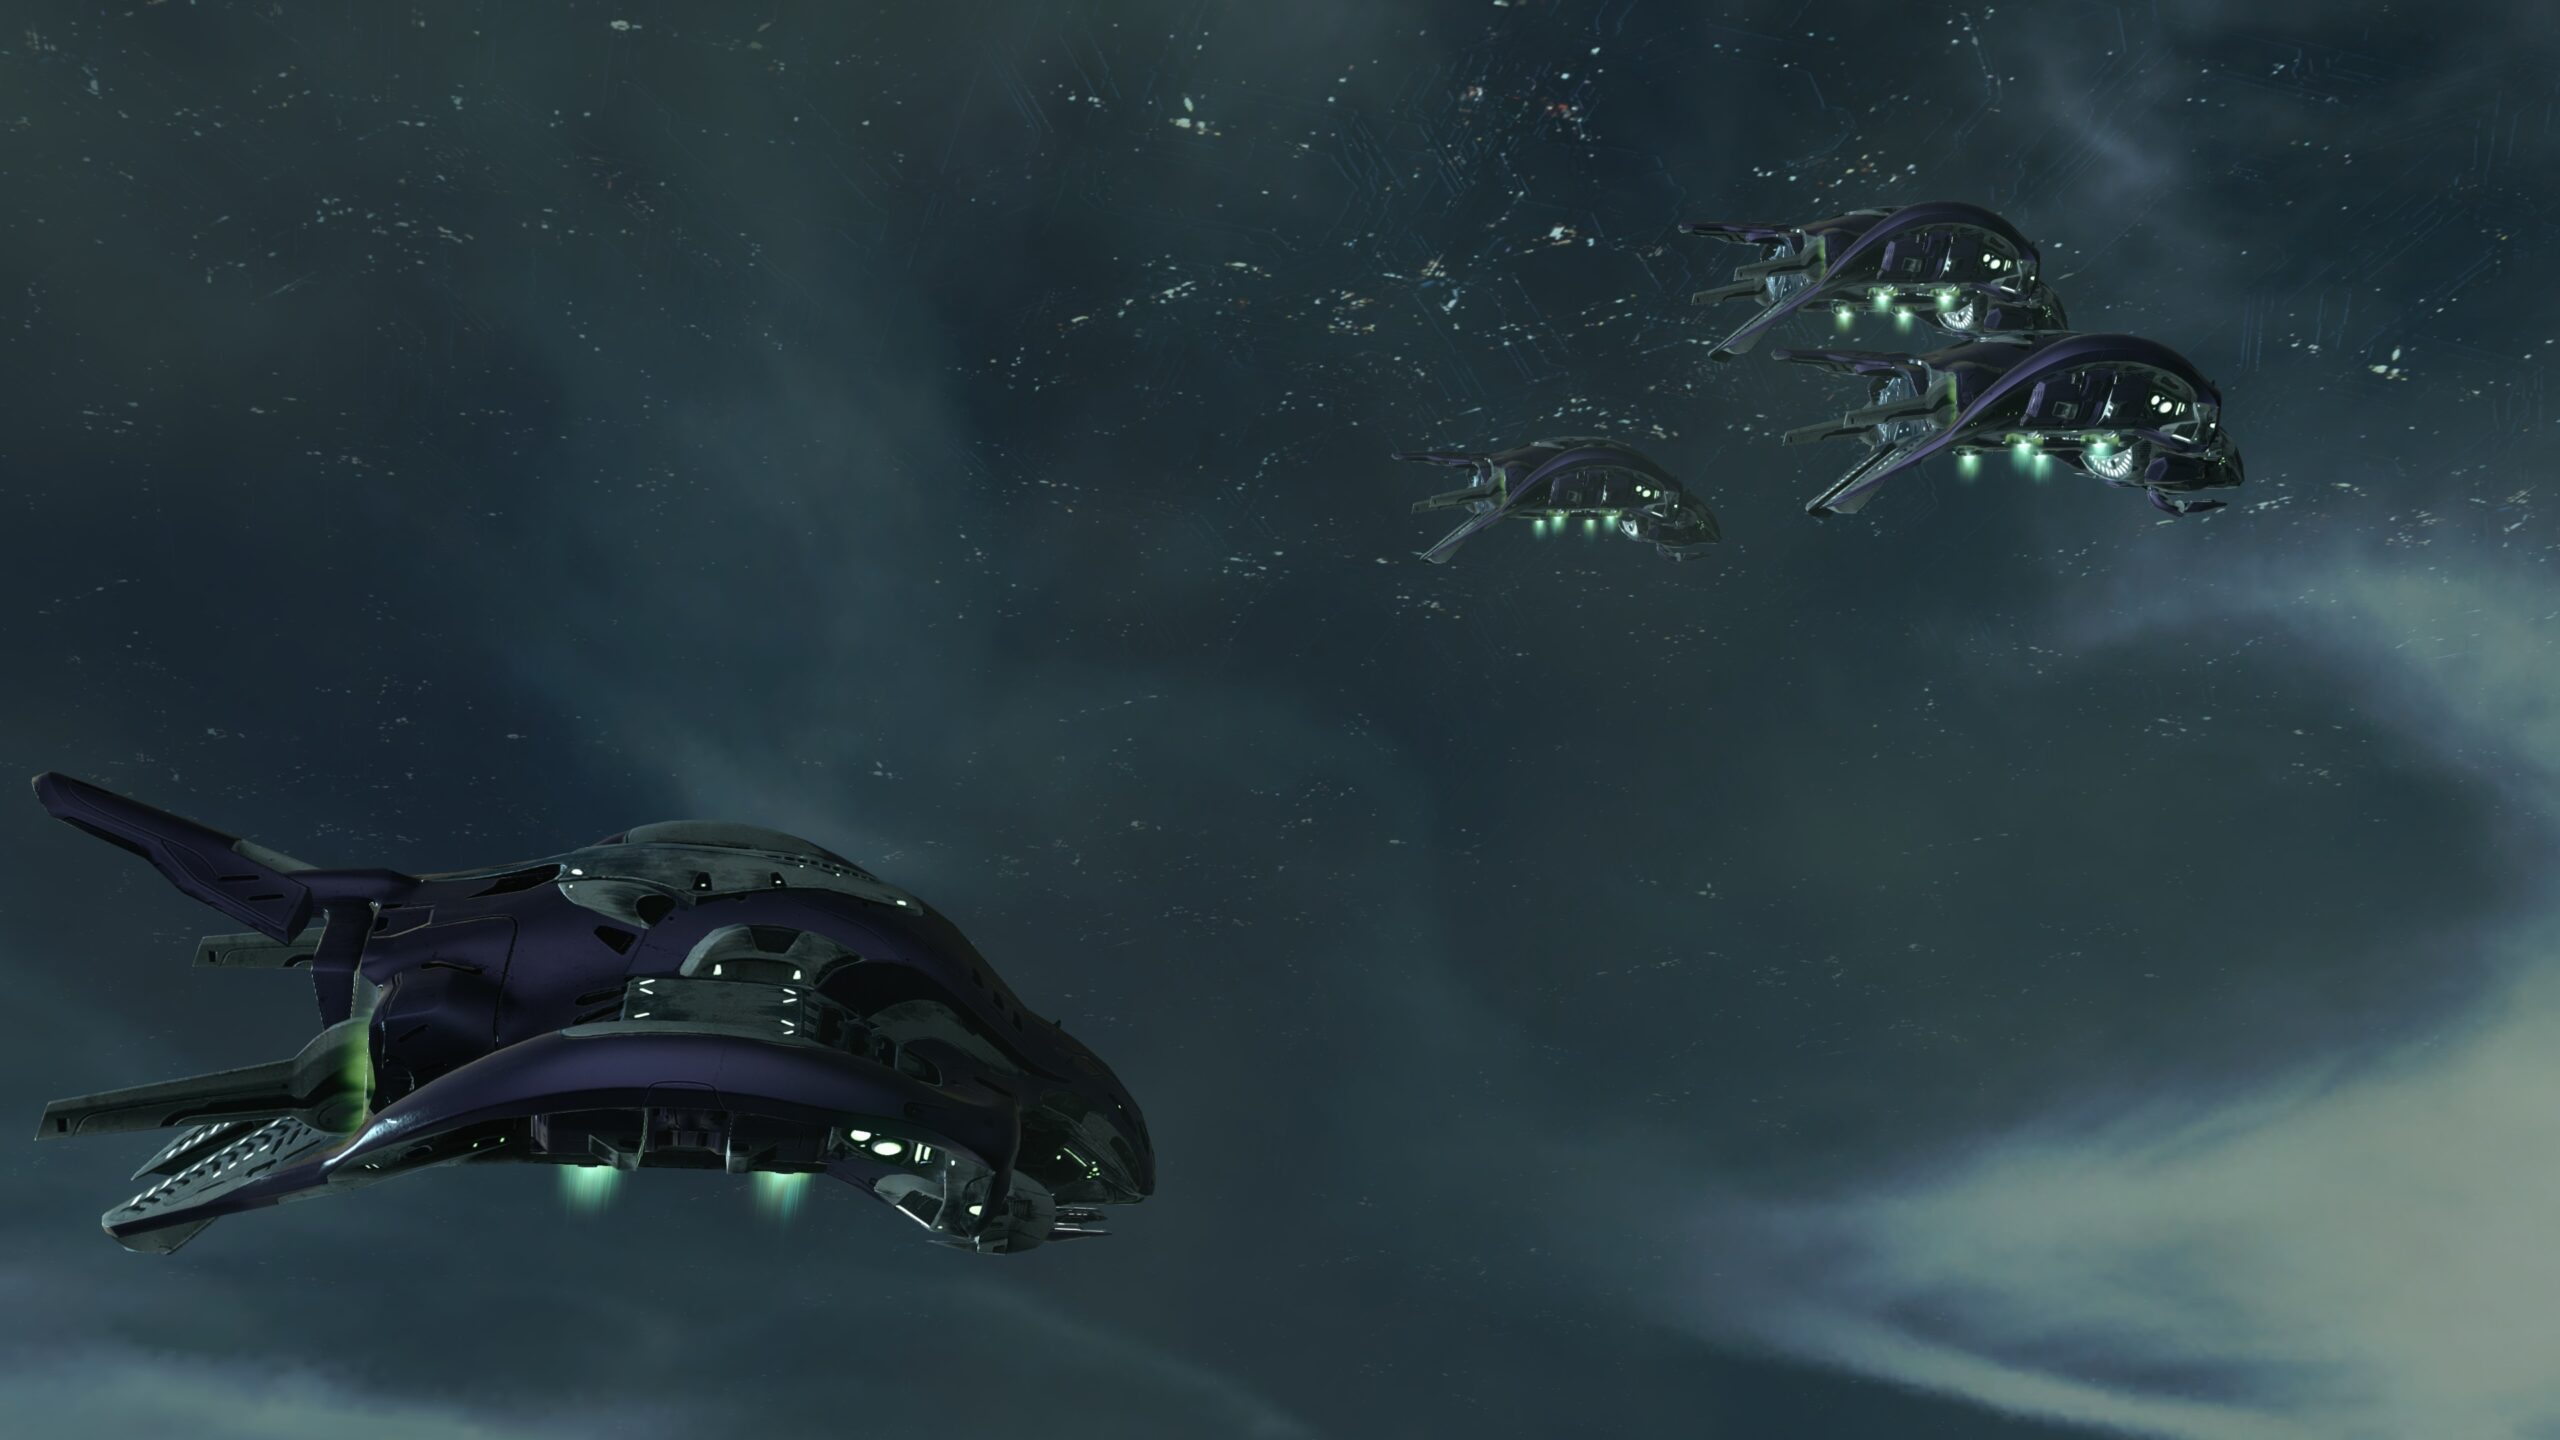 Halo 4 Spartan Ops in-game screenshot of Phantoms flying inside Requiem at night